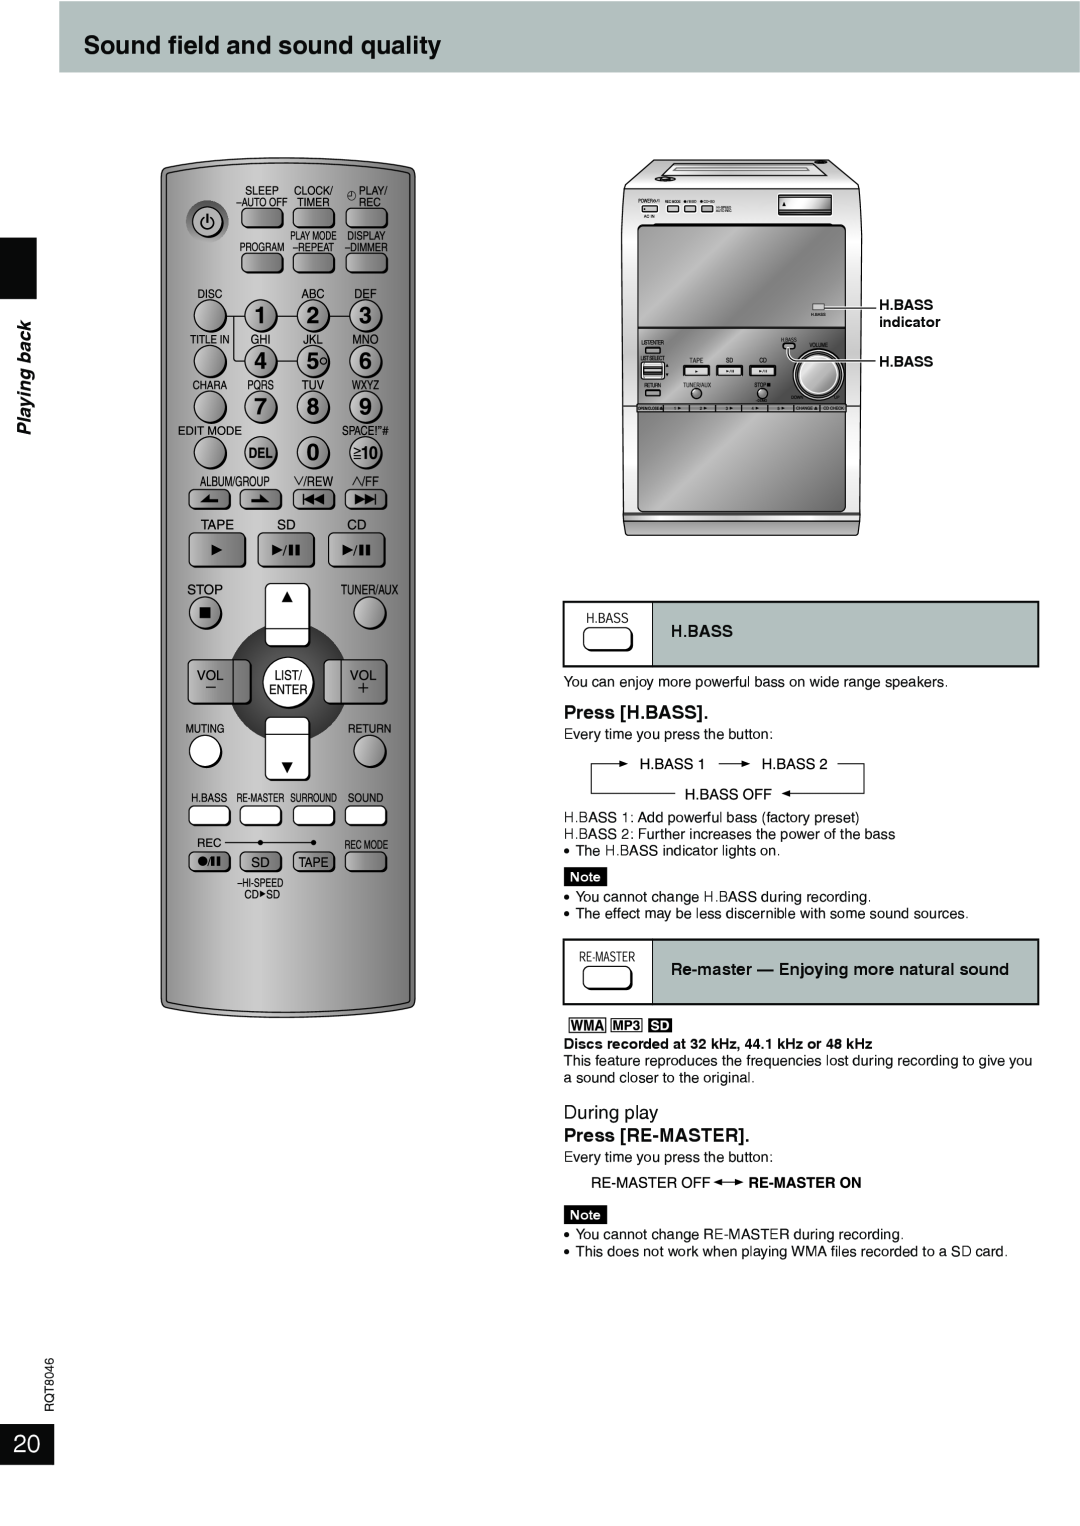 Panasonic SC-PM71SD manual Sound field and sound quality, Playing back, During play, H.Bass 